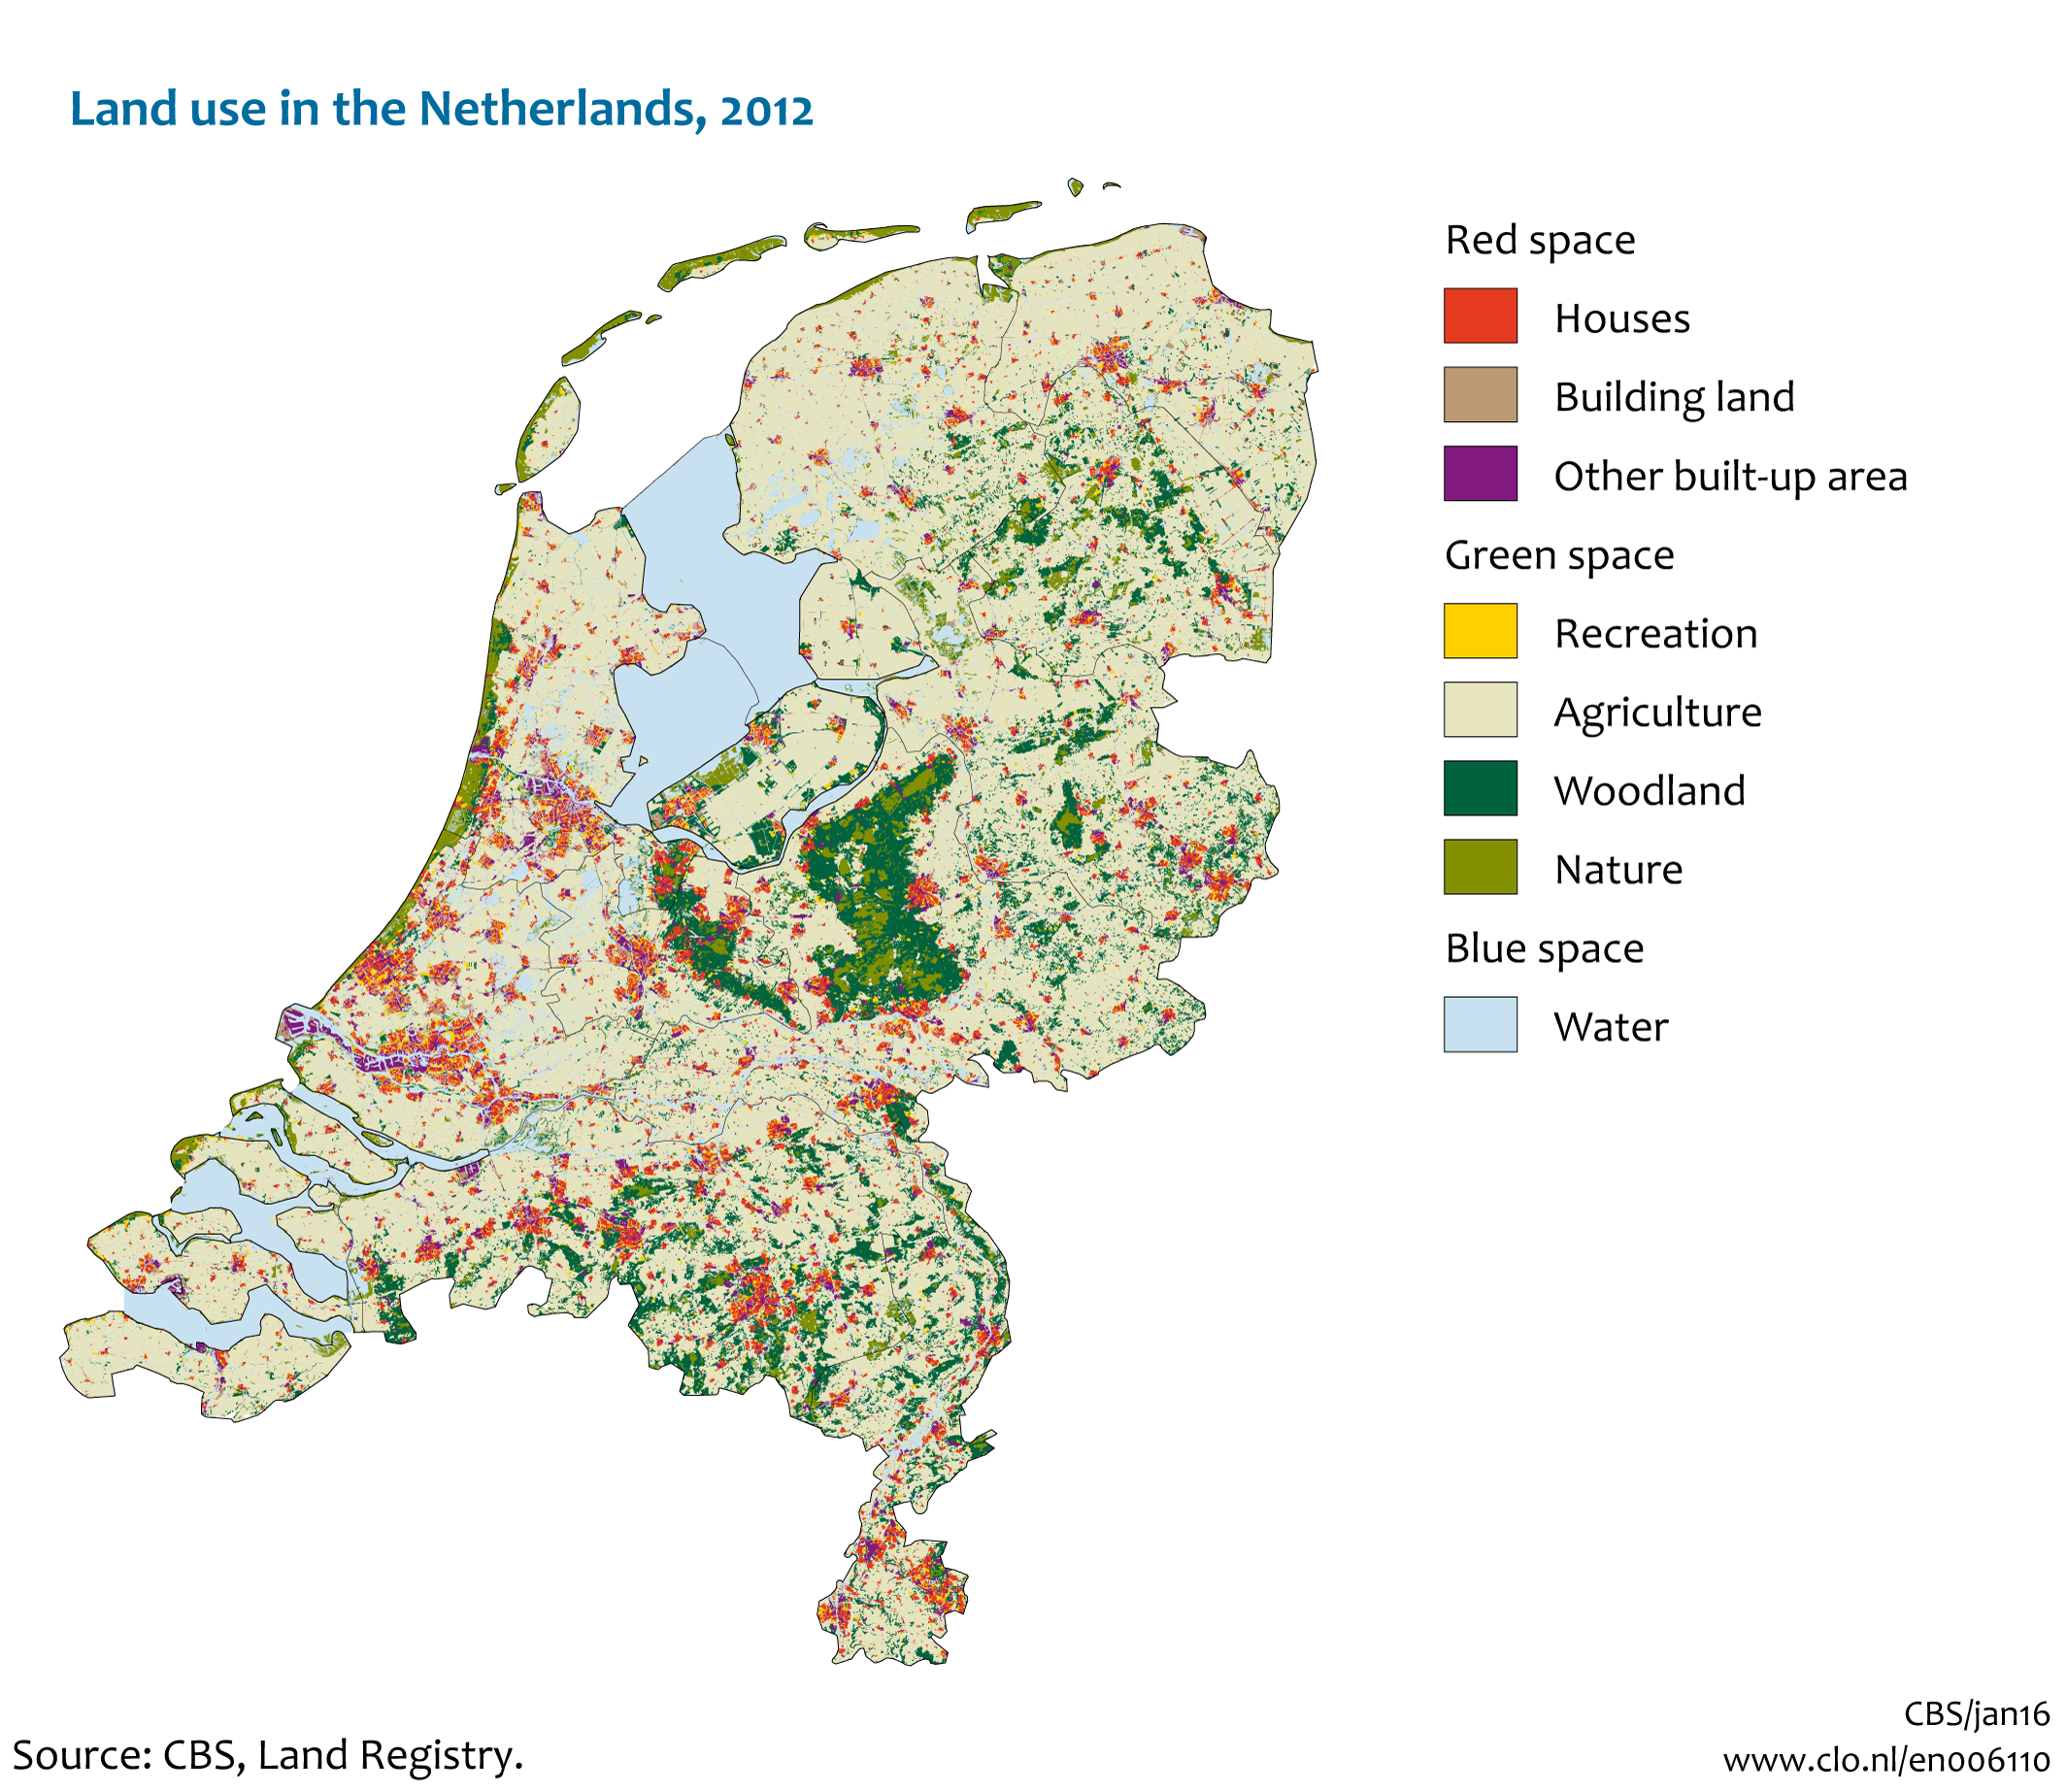 Image Land use in the Netherlands, 2012. The image is further explained in the text.